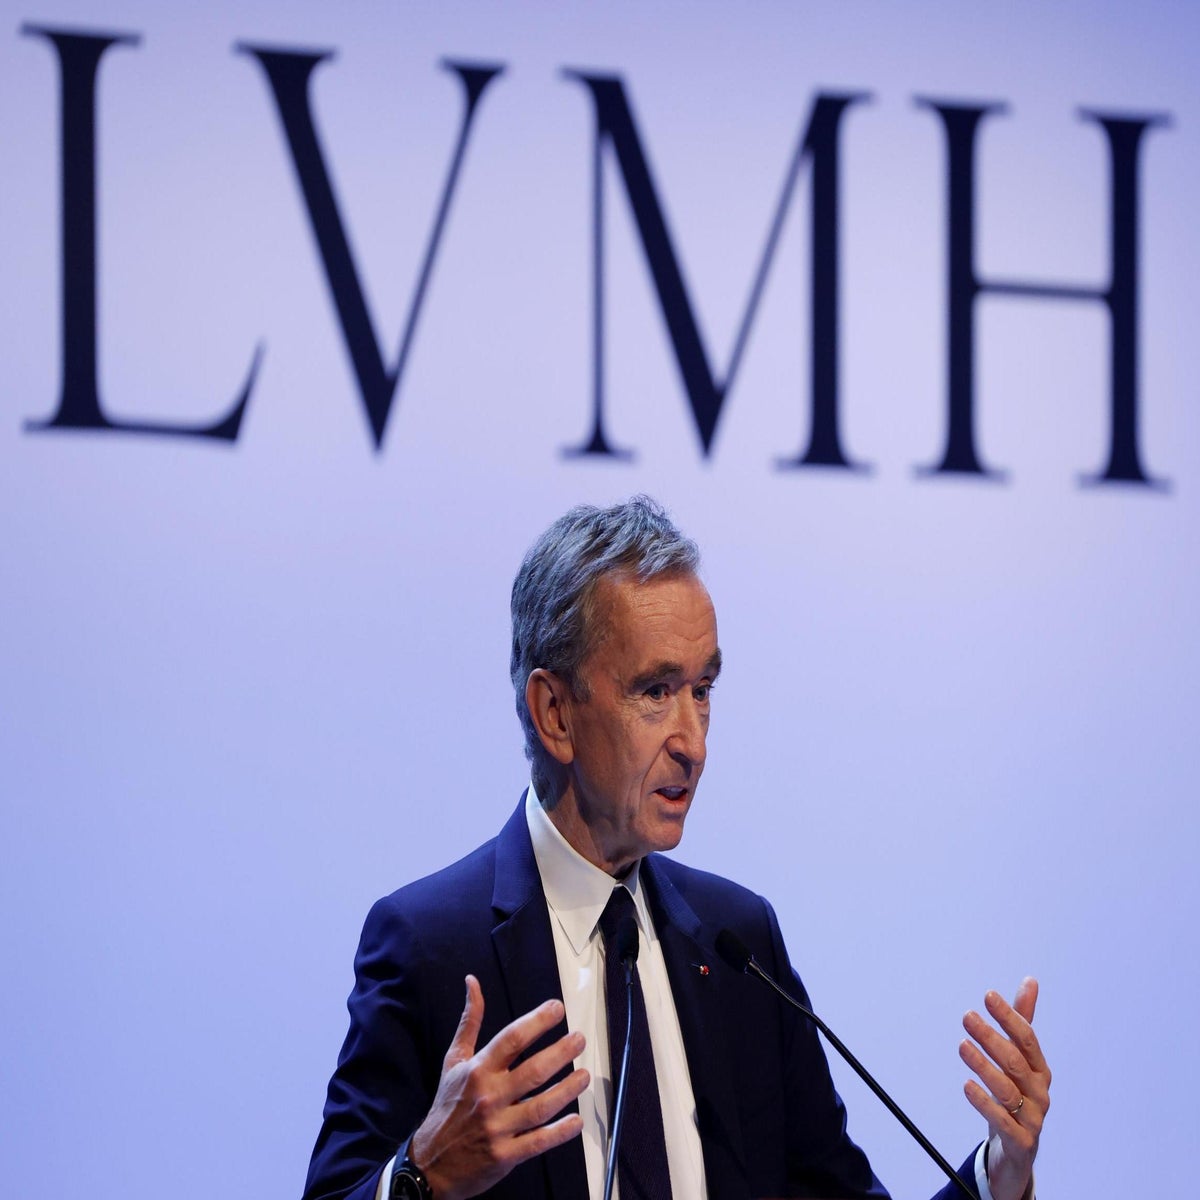 LVMH to use P&C production facilities to make hand sanitiser for French  hospitals